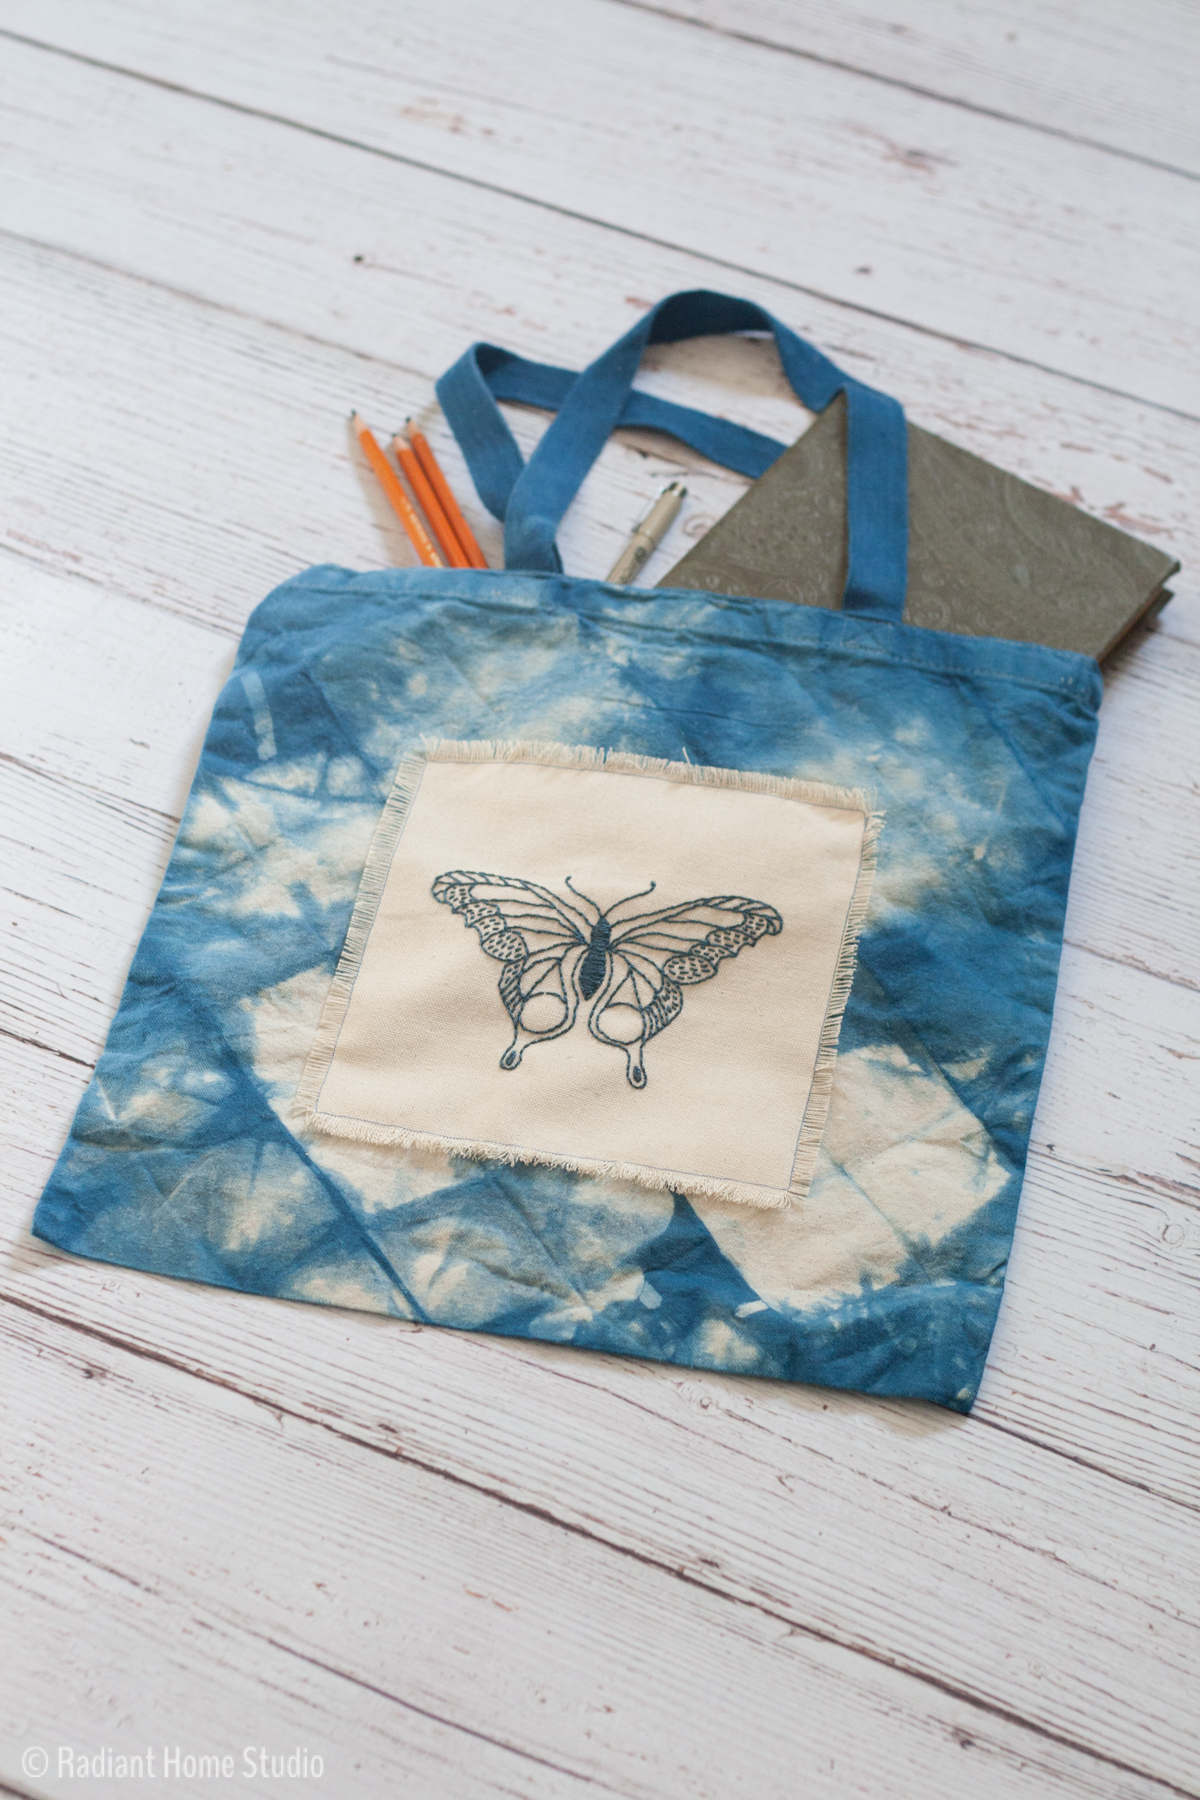 Indigo Embroidered Tote Bag | Butterfly Pattern from I Heart Stitch Art | Radiant Home Studio